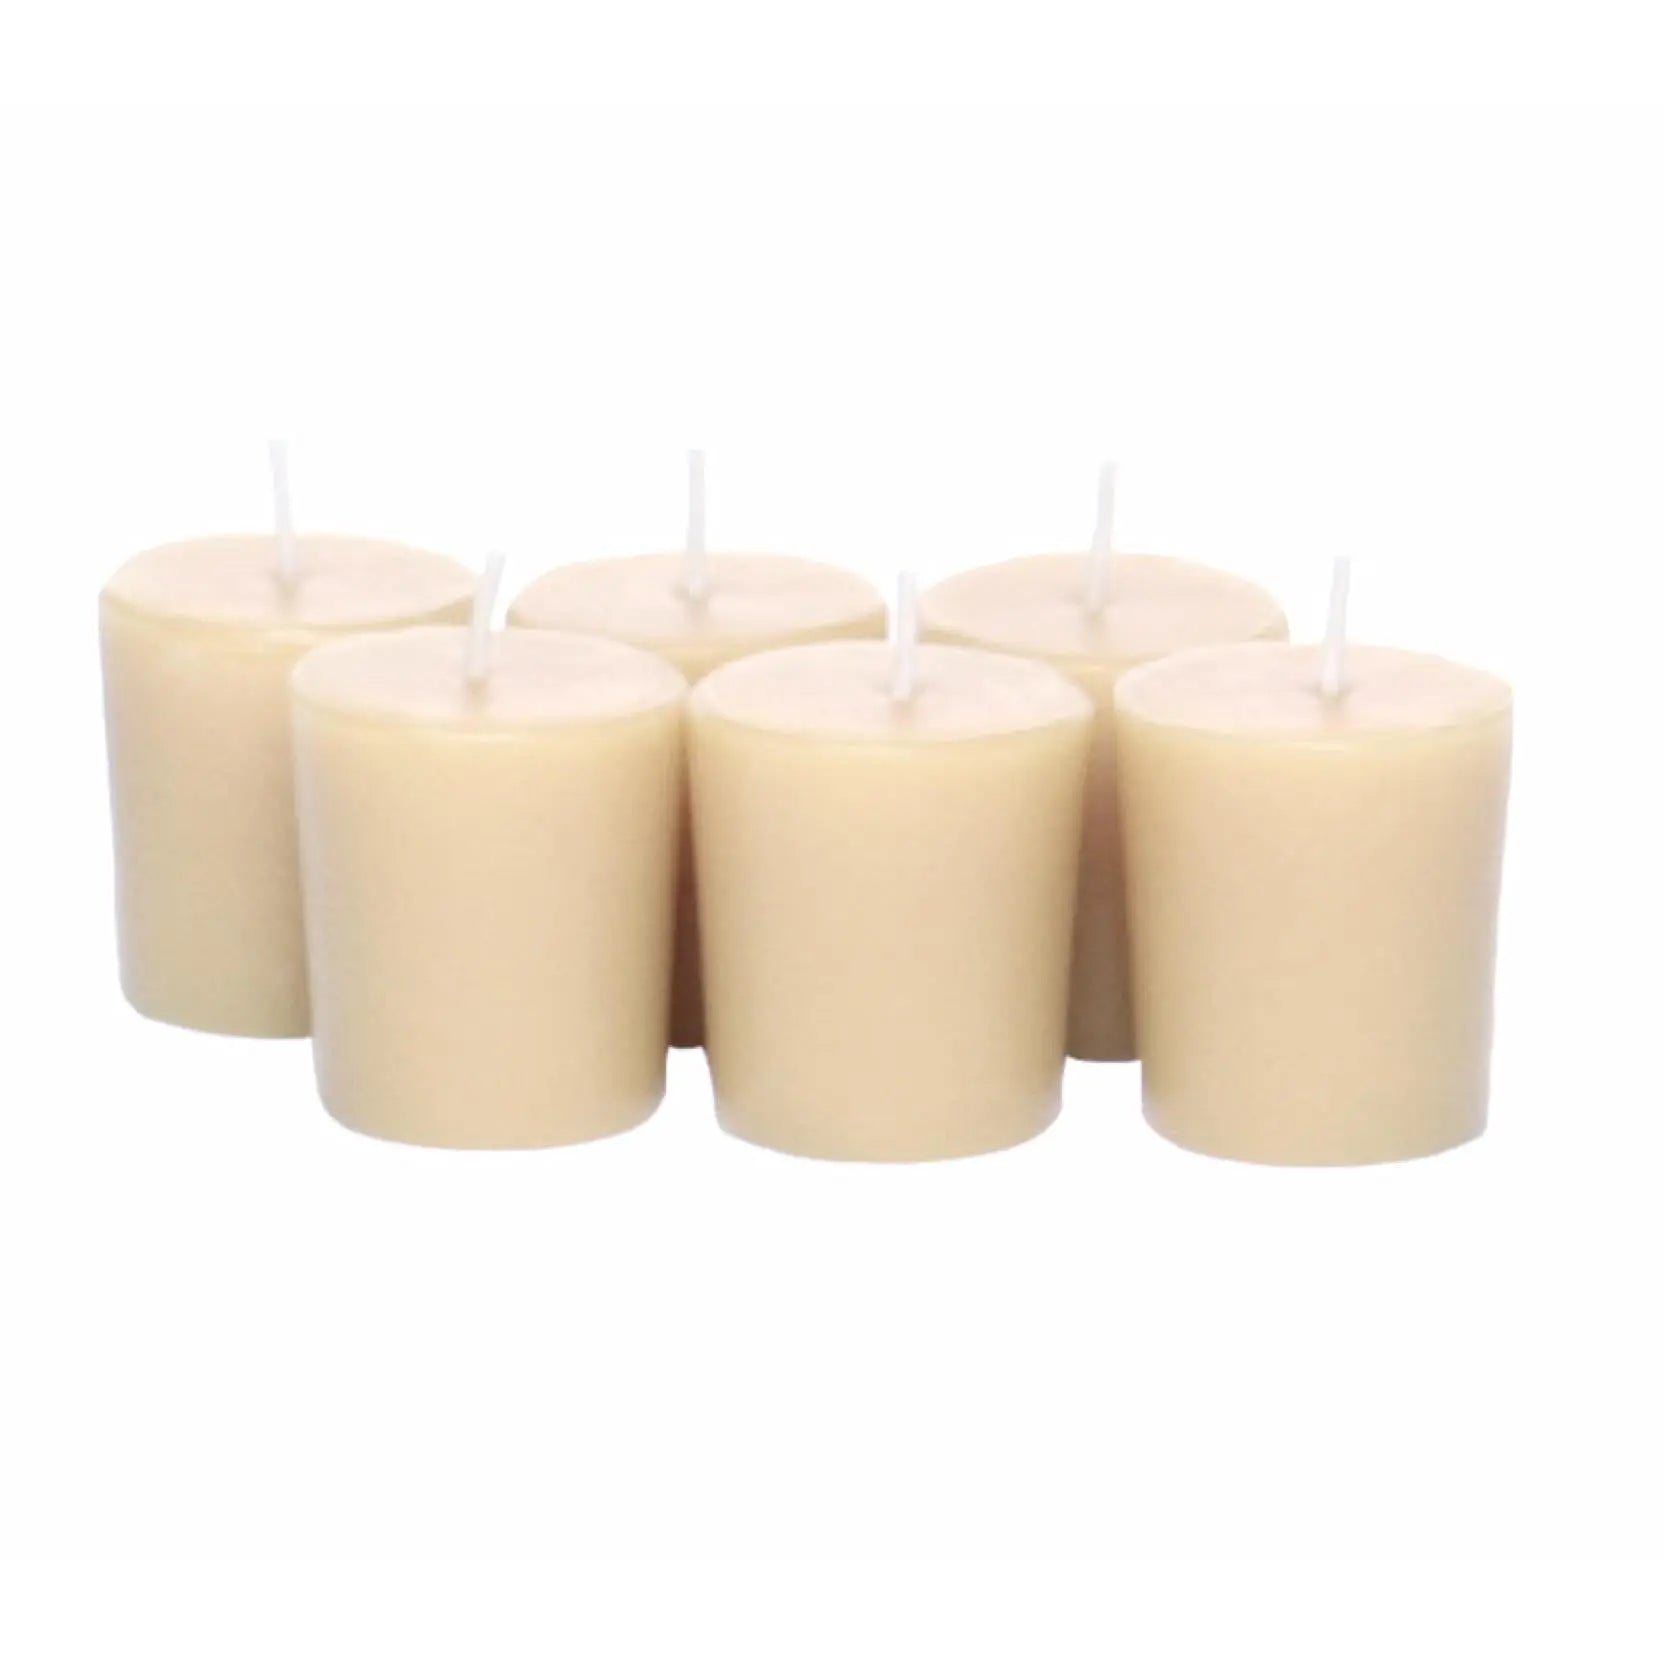 Ivory Beeswax Votives - Home Smith